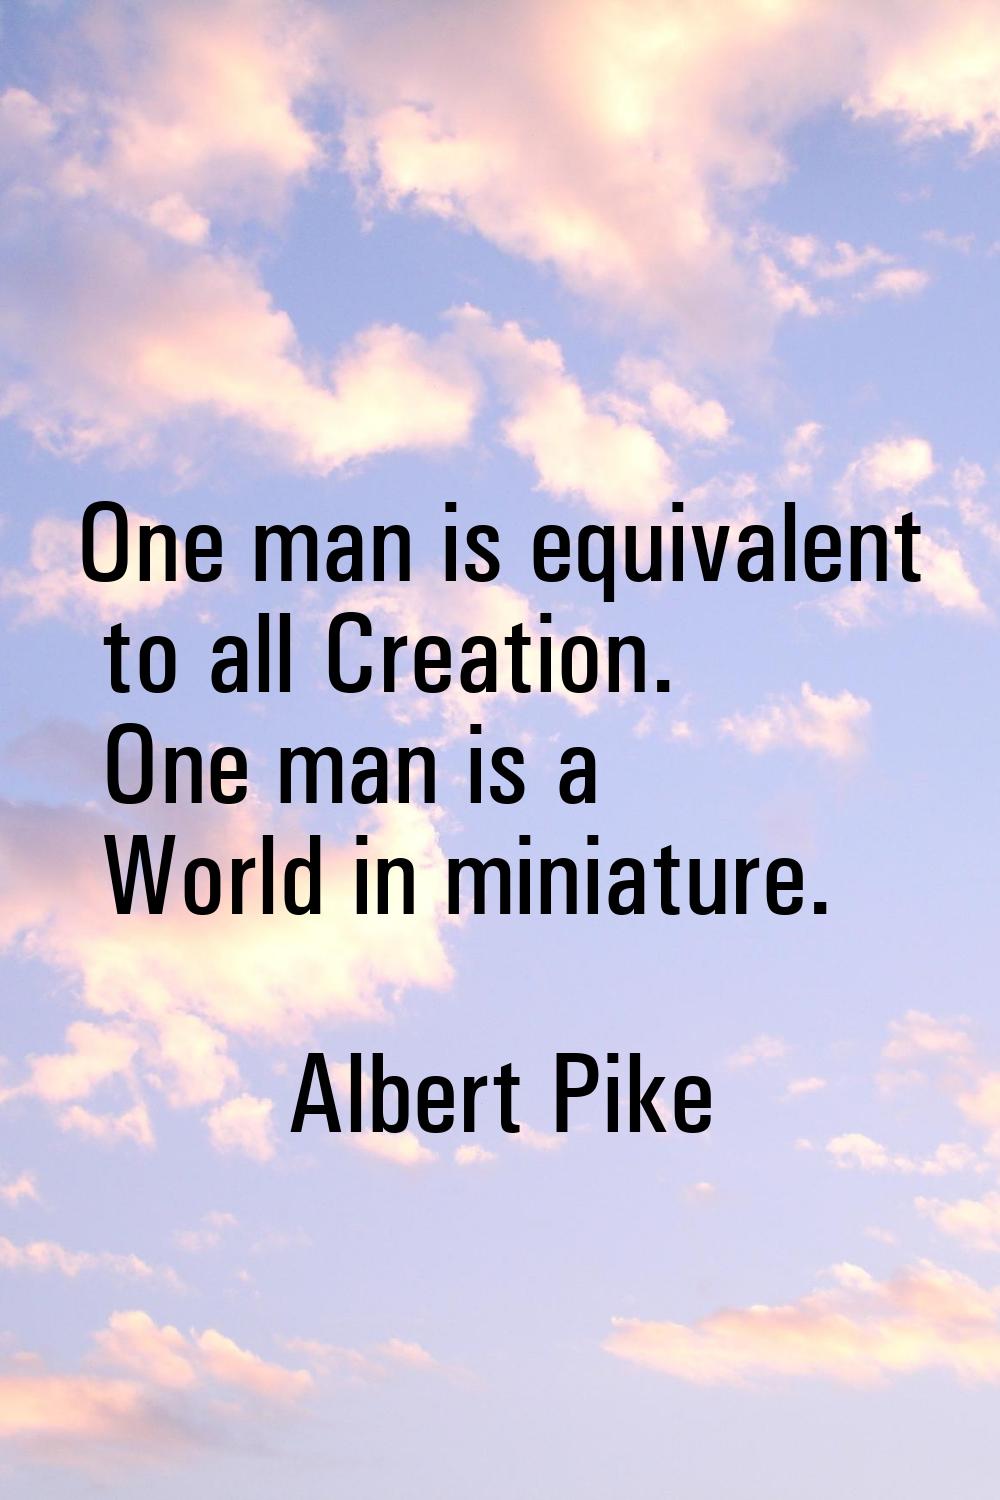 One man is equivalent to all Creation. One man is a World in miniature.